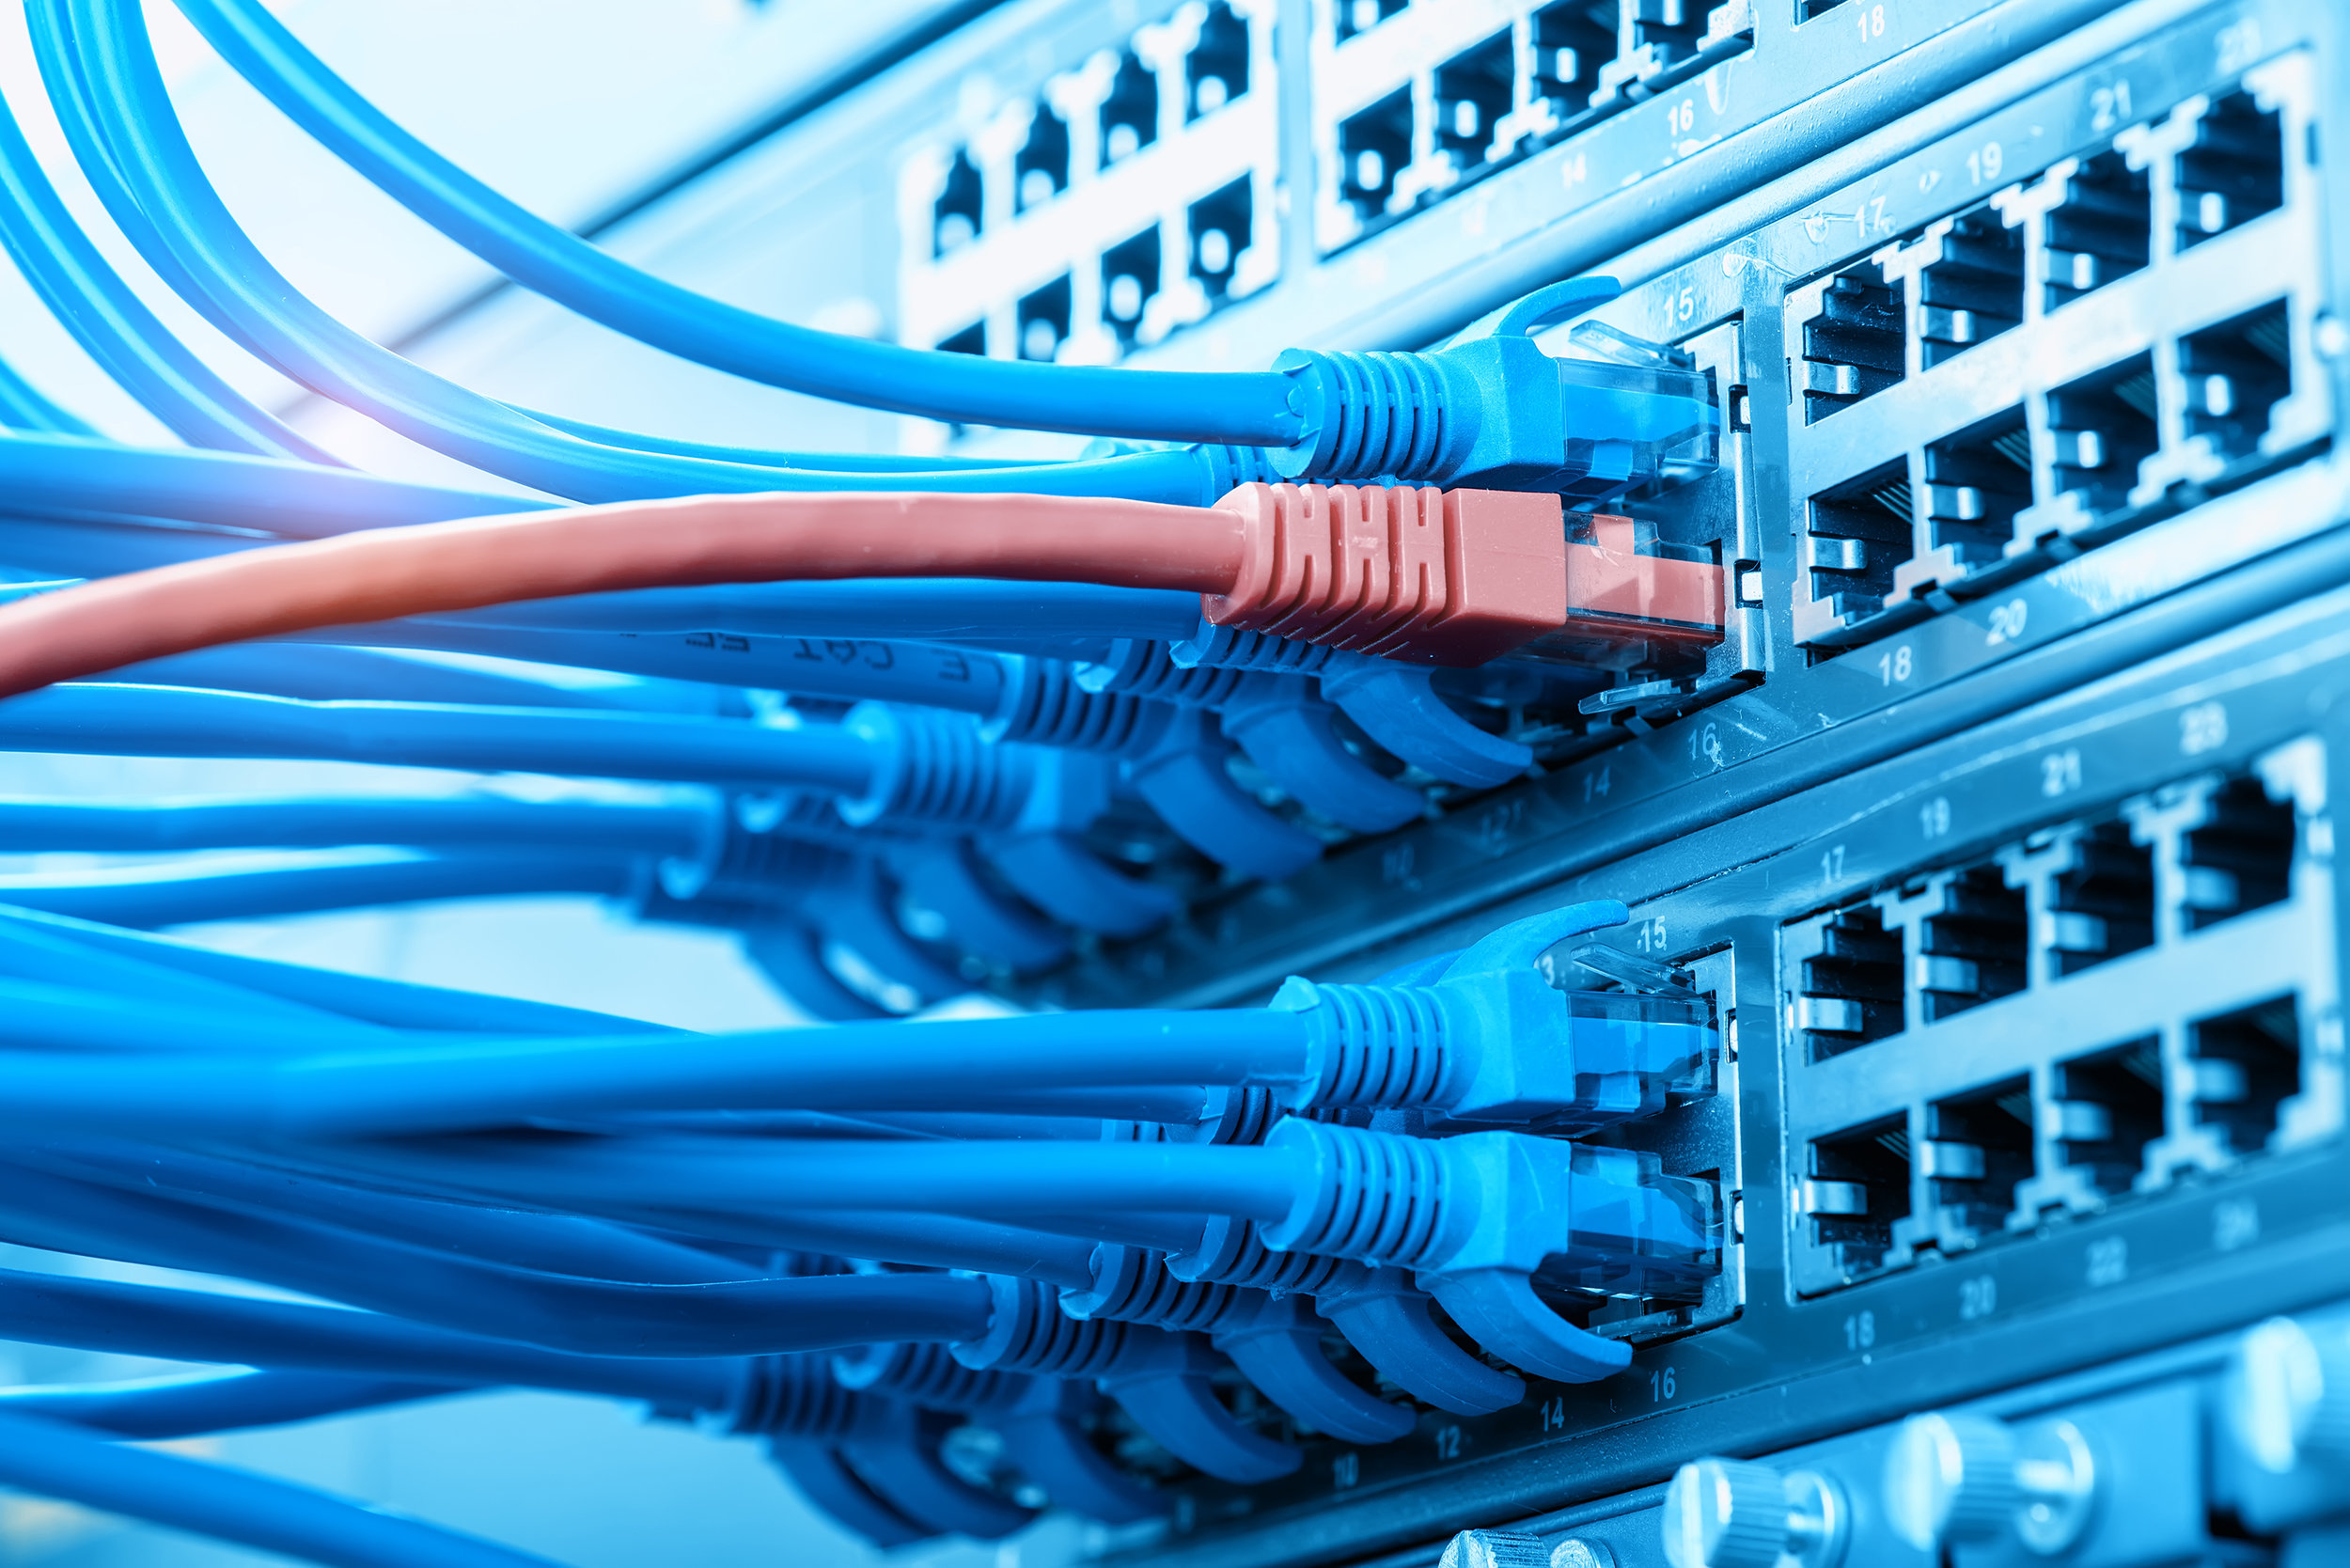 https://technoworldnow.com/what-is-fibre-channel-and-fc-over-ethernet/